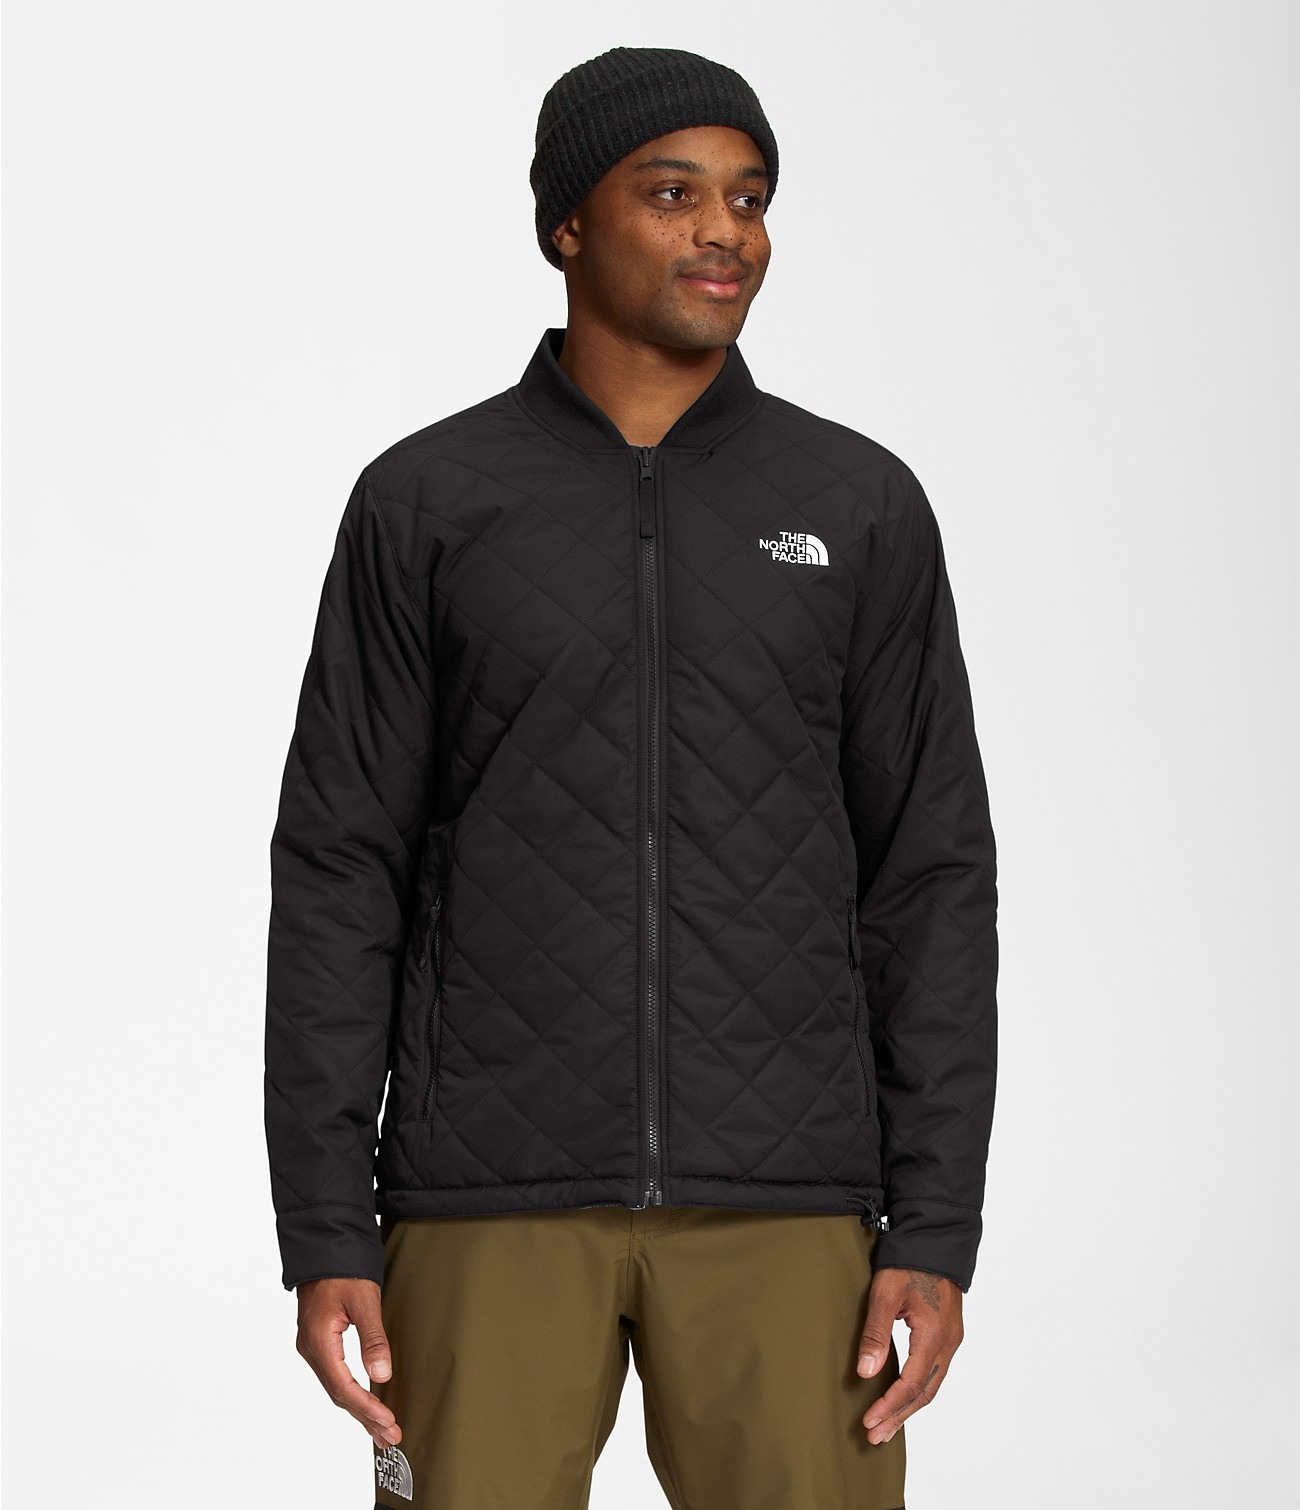 The North Face Jester Jacket In Black For Men Lyst | lupon.gov.ph